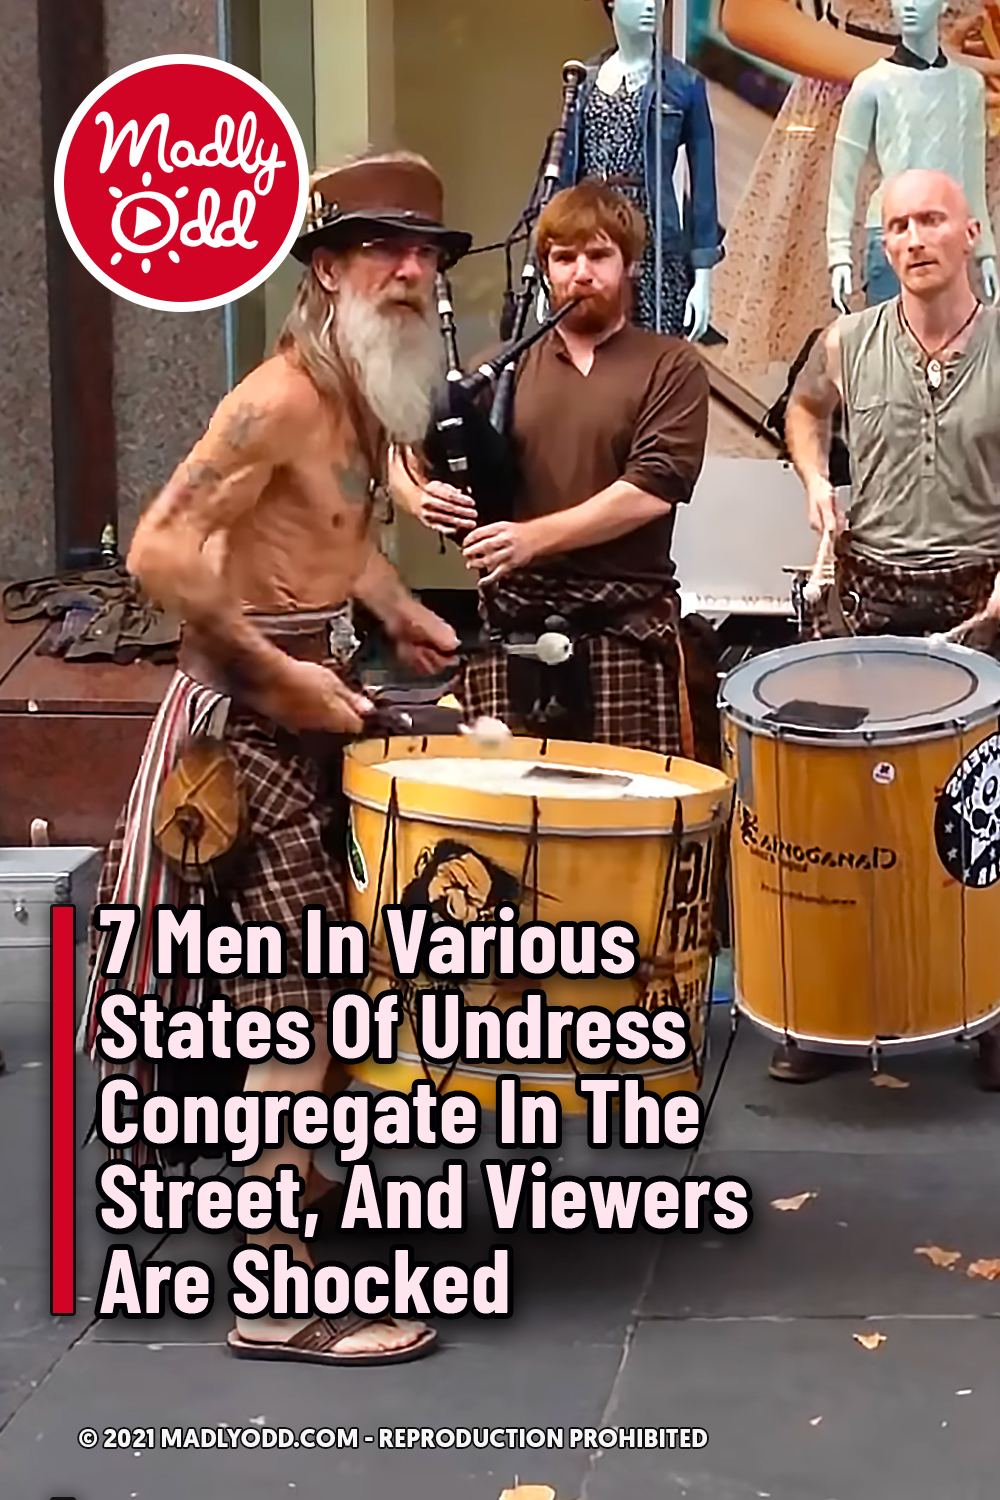 7 Men In Various States Of Undress Congregate In The Street, And Viewers Are Shocked